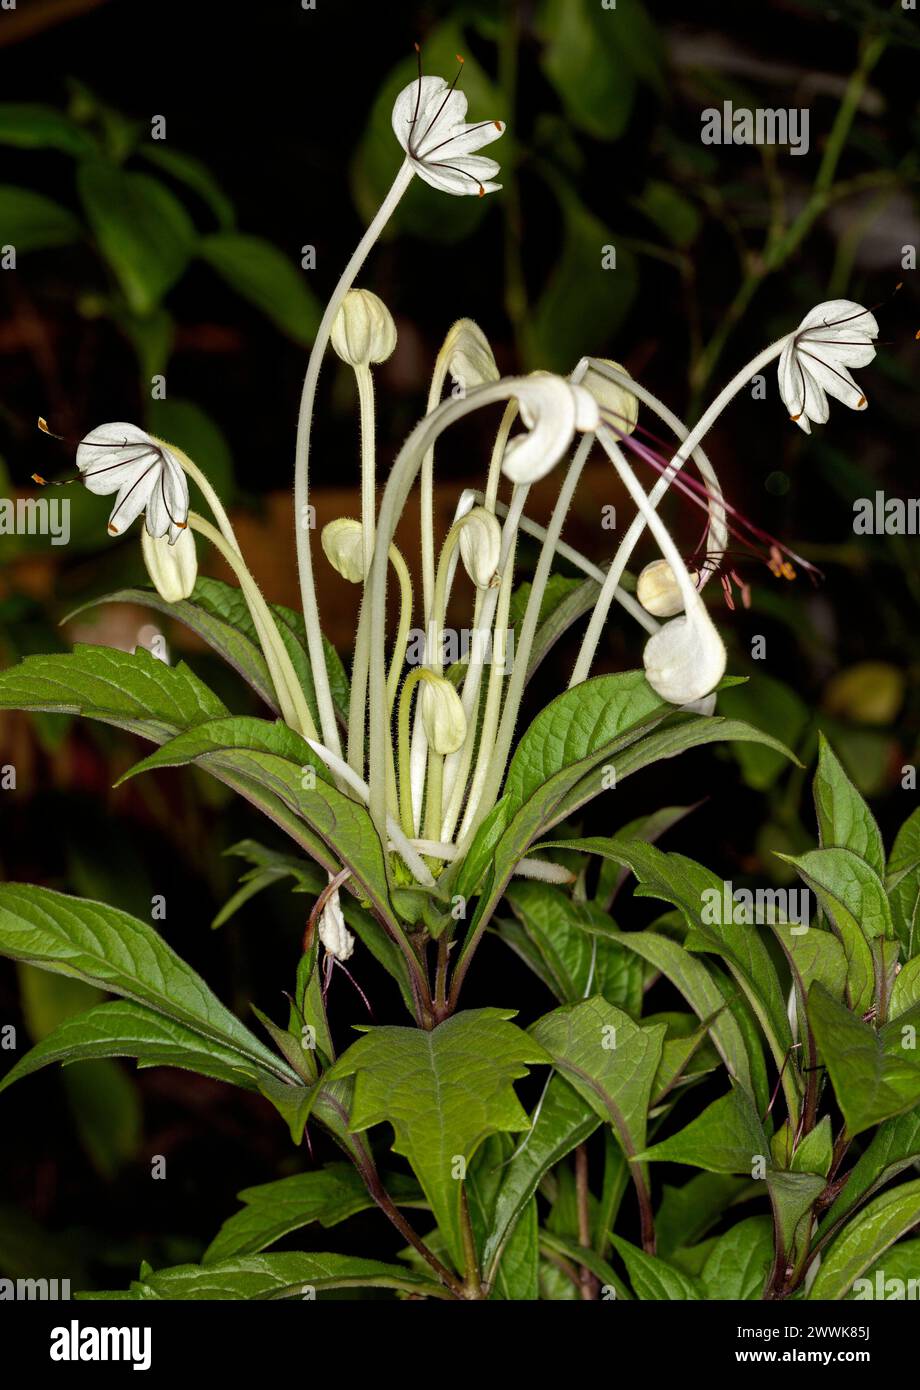 Musical Note Plant, Rotheca incisa syn. Clerodendrum incisum, unusual garden plant with white flowers and bright green leaves on dark background Stock Photo